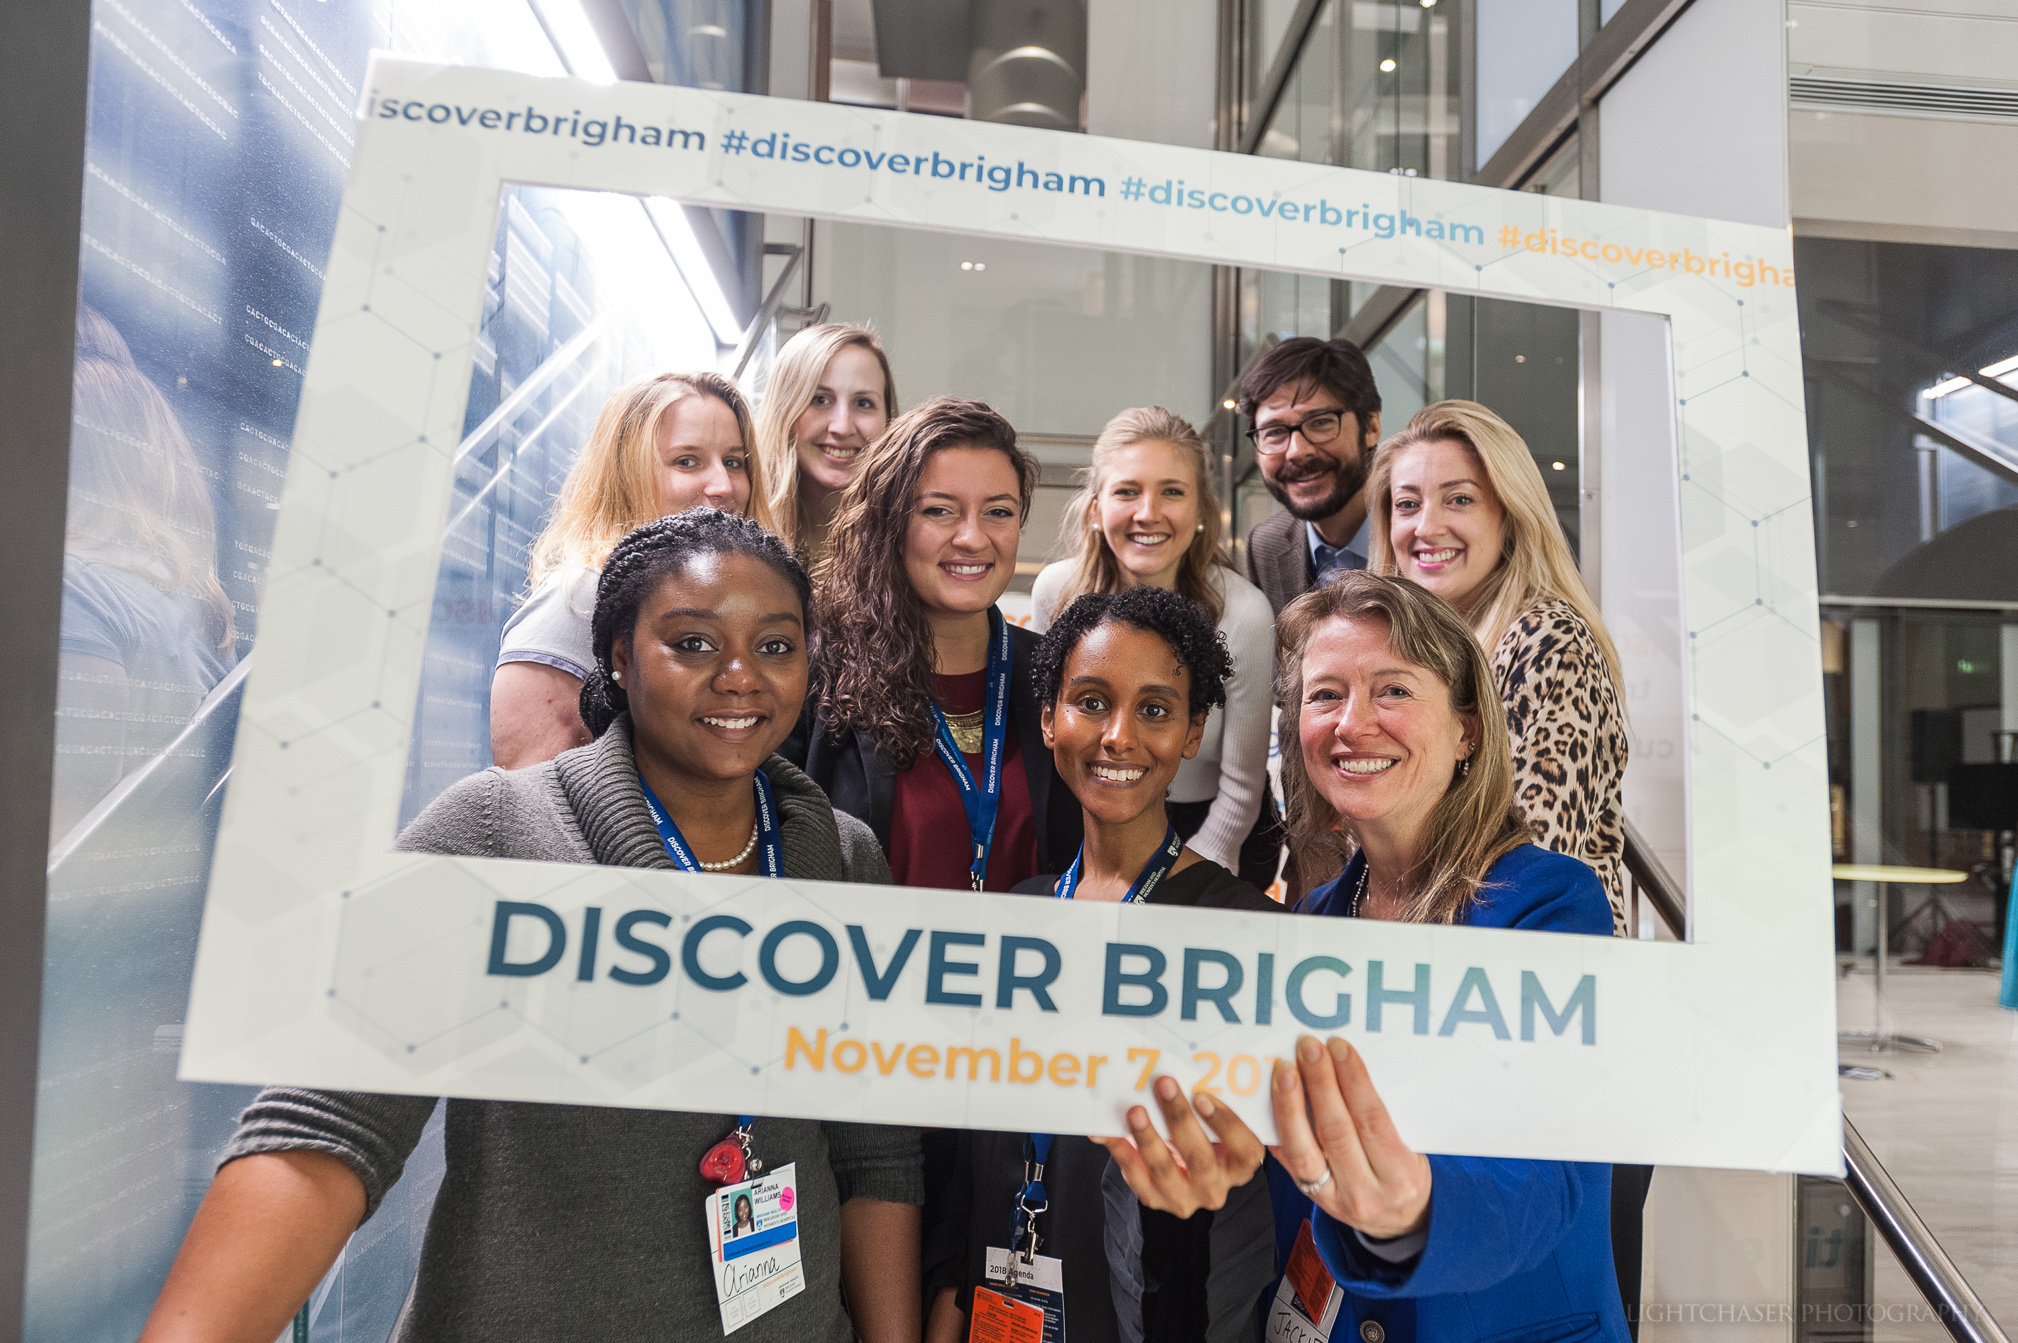 Discover Brigham attendees